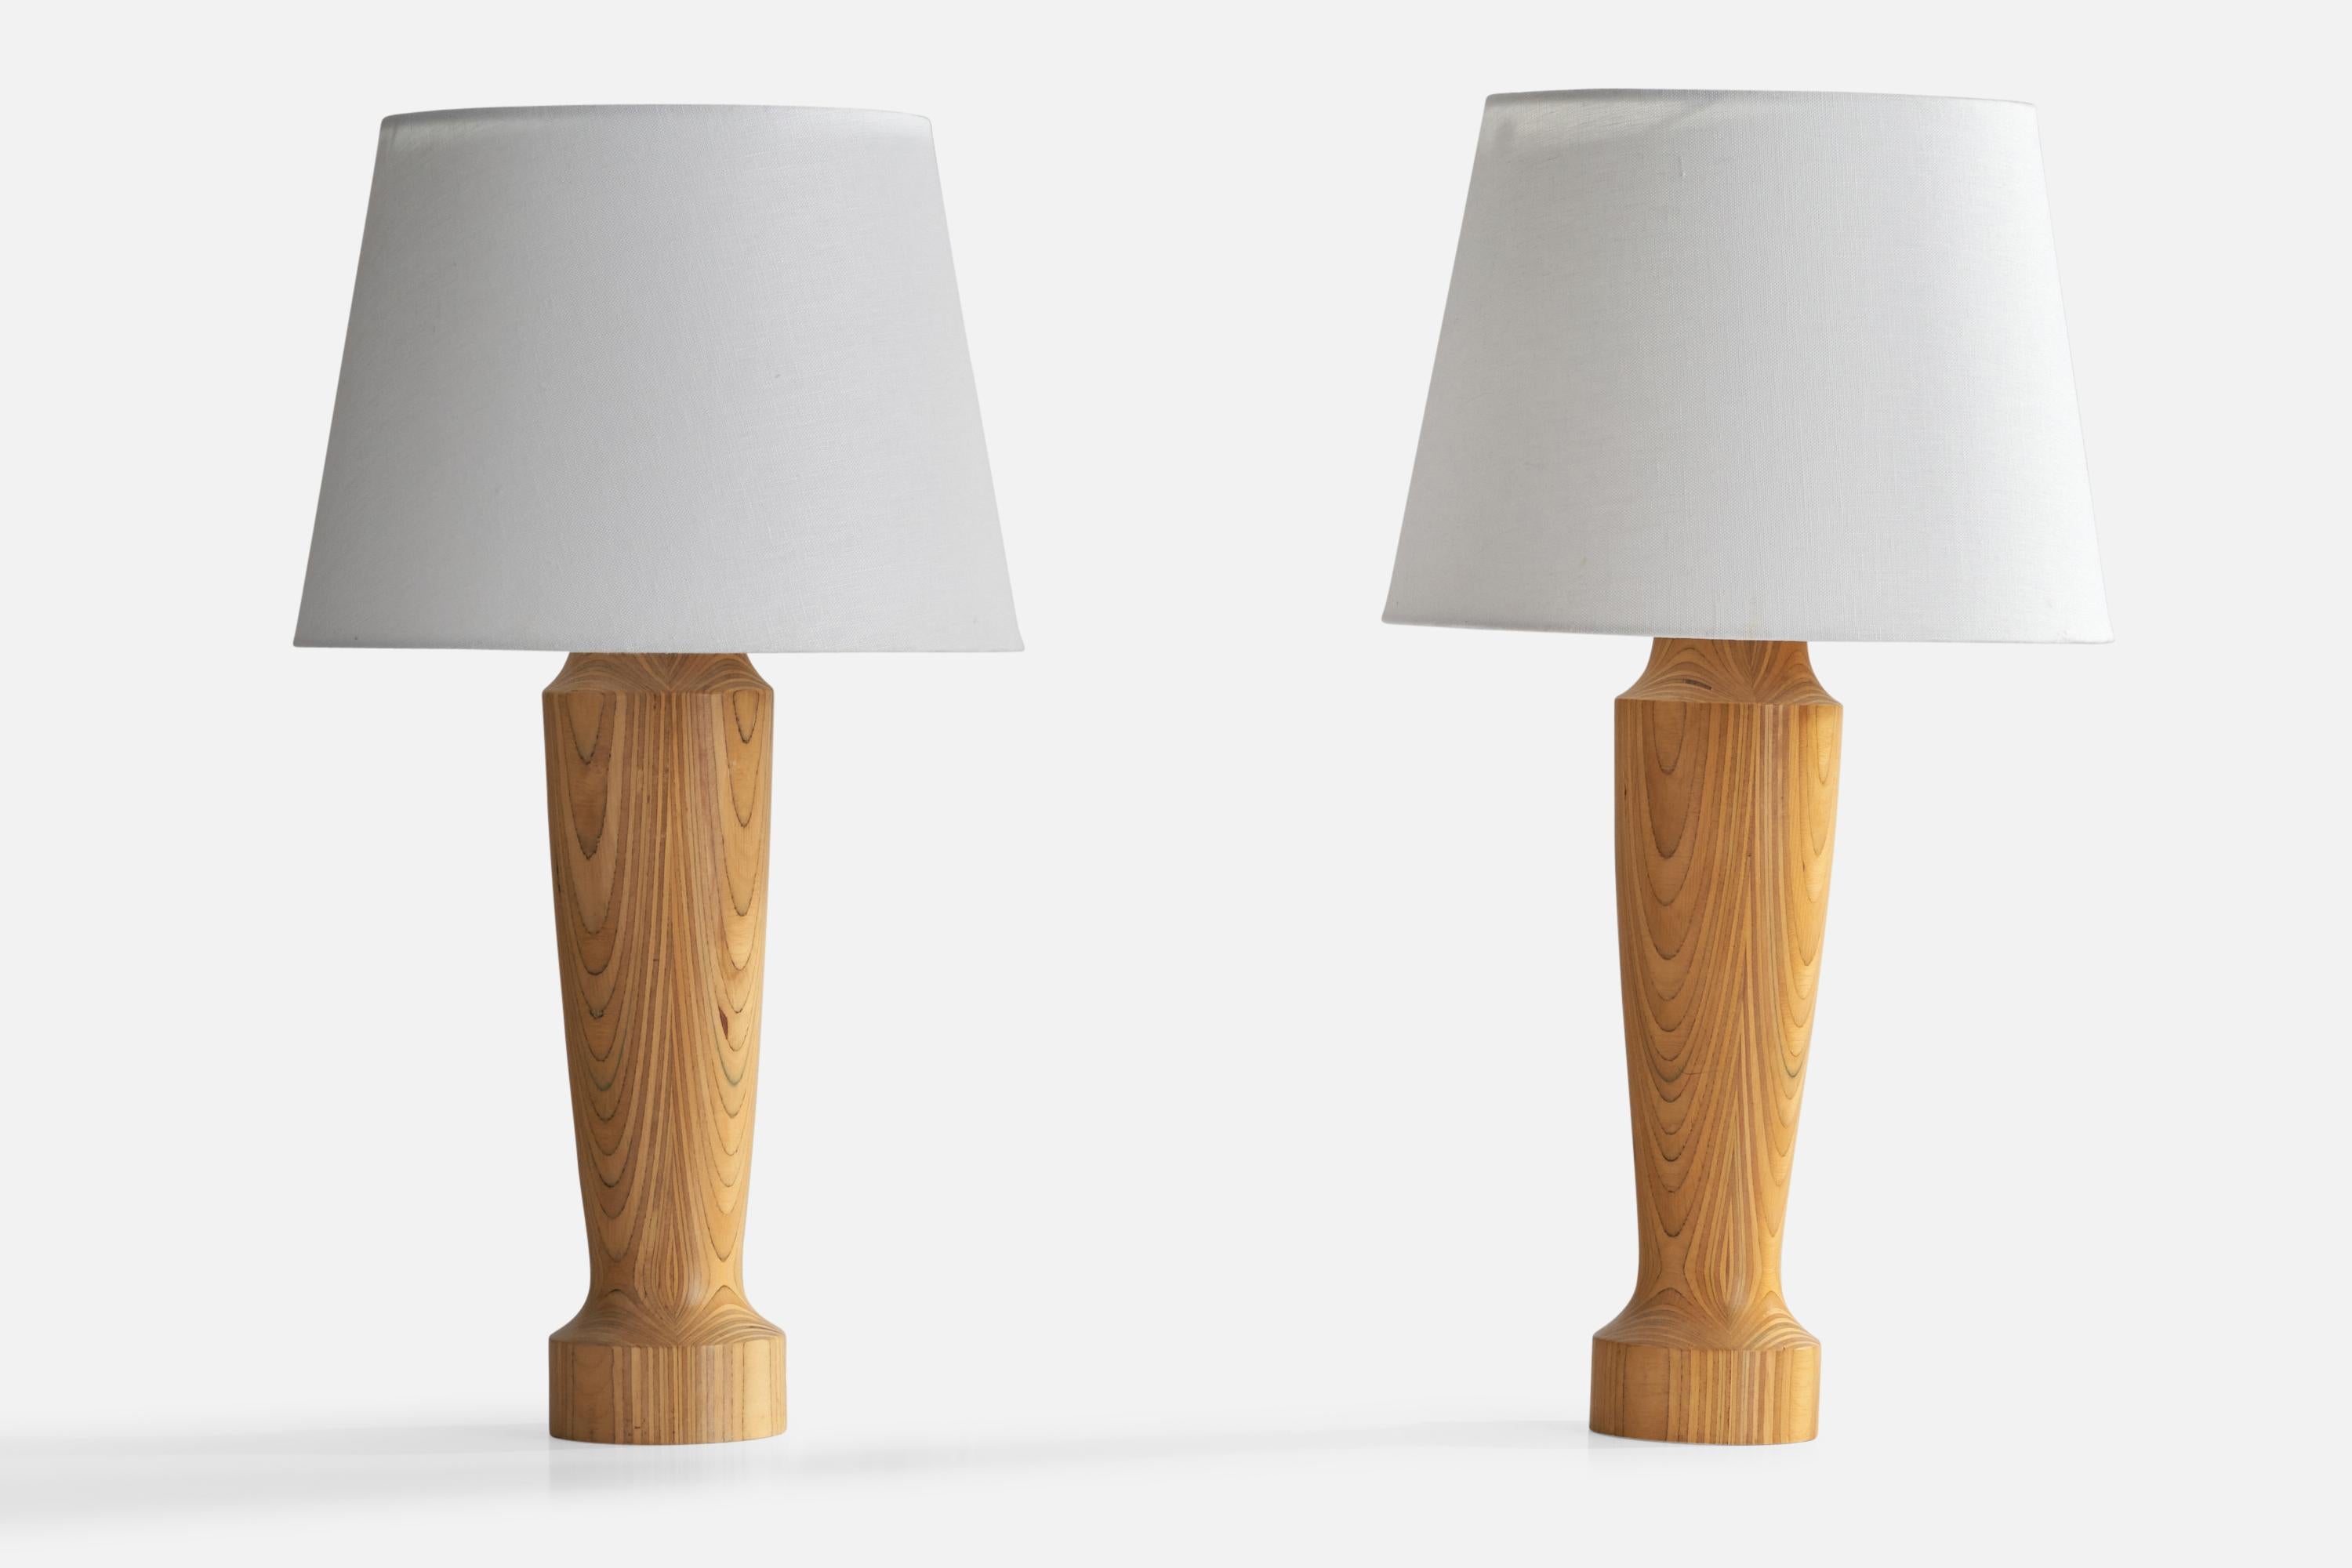 A pair of stack-laminated pine table lamps designed and produced in Sweden, 1960s.

Dimensions of Lamp (inches): 16.9”  H x 3.9”  Diameter
Dimensions of Shade (inches): 9”  Top Diameter x 12”  Bottom Diameter x 8.75” H
Dimensions of Lamp with Shade